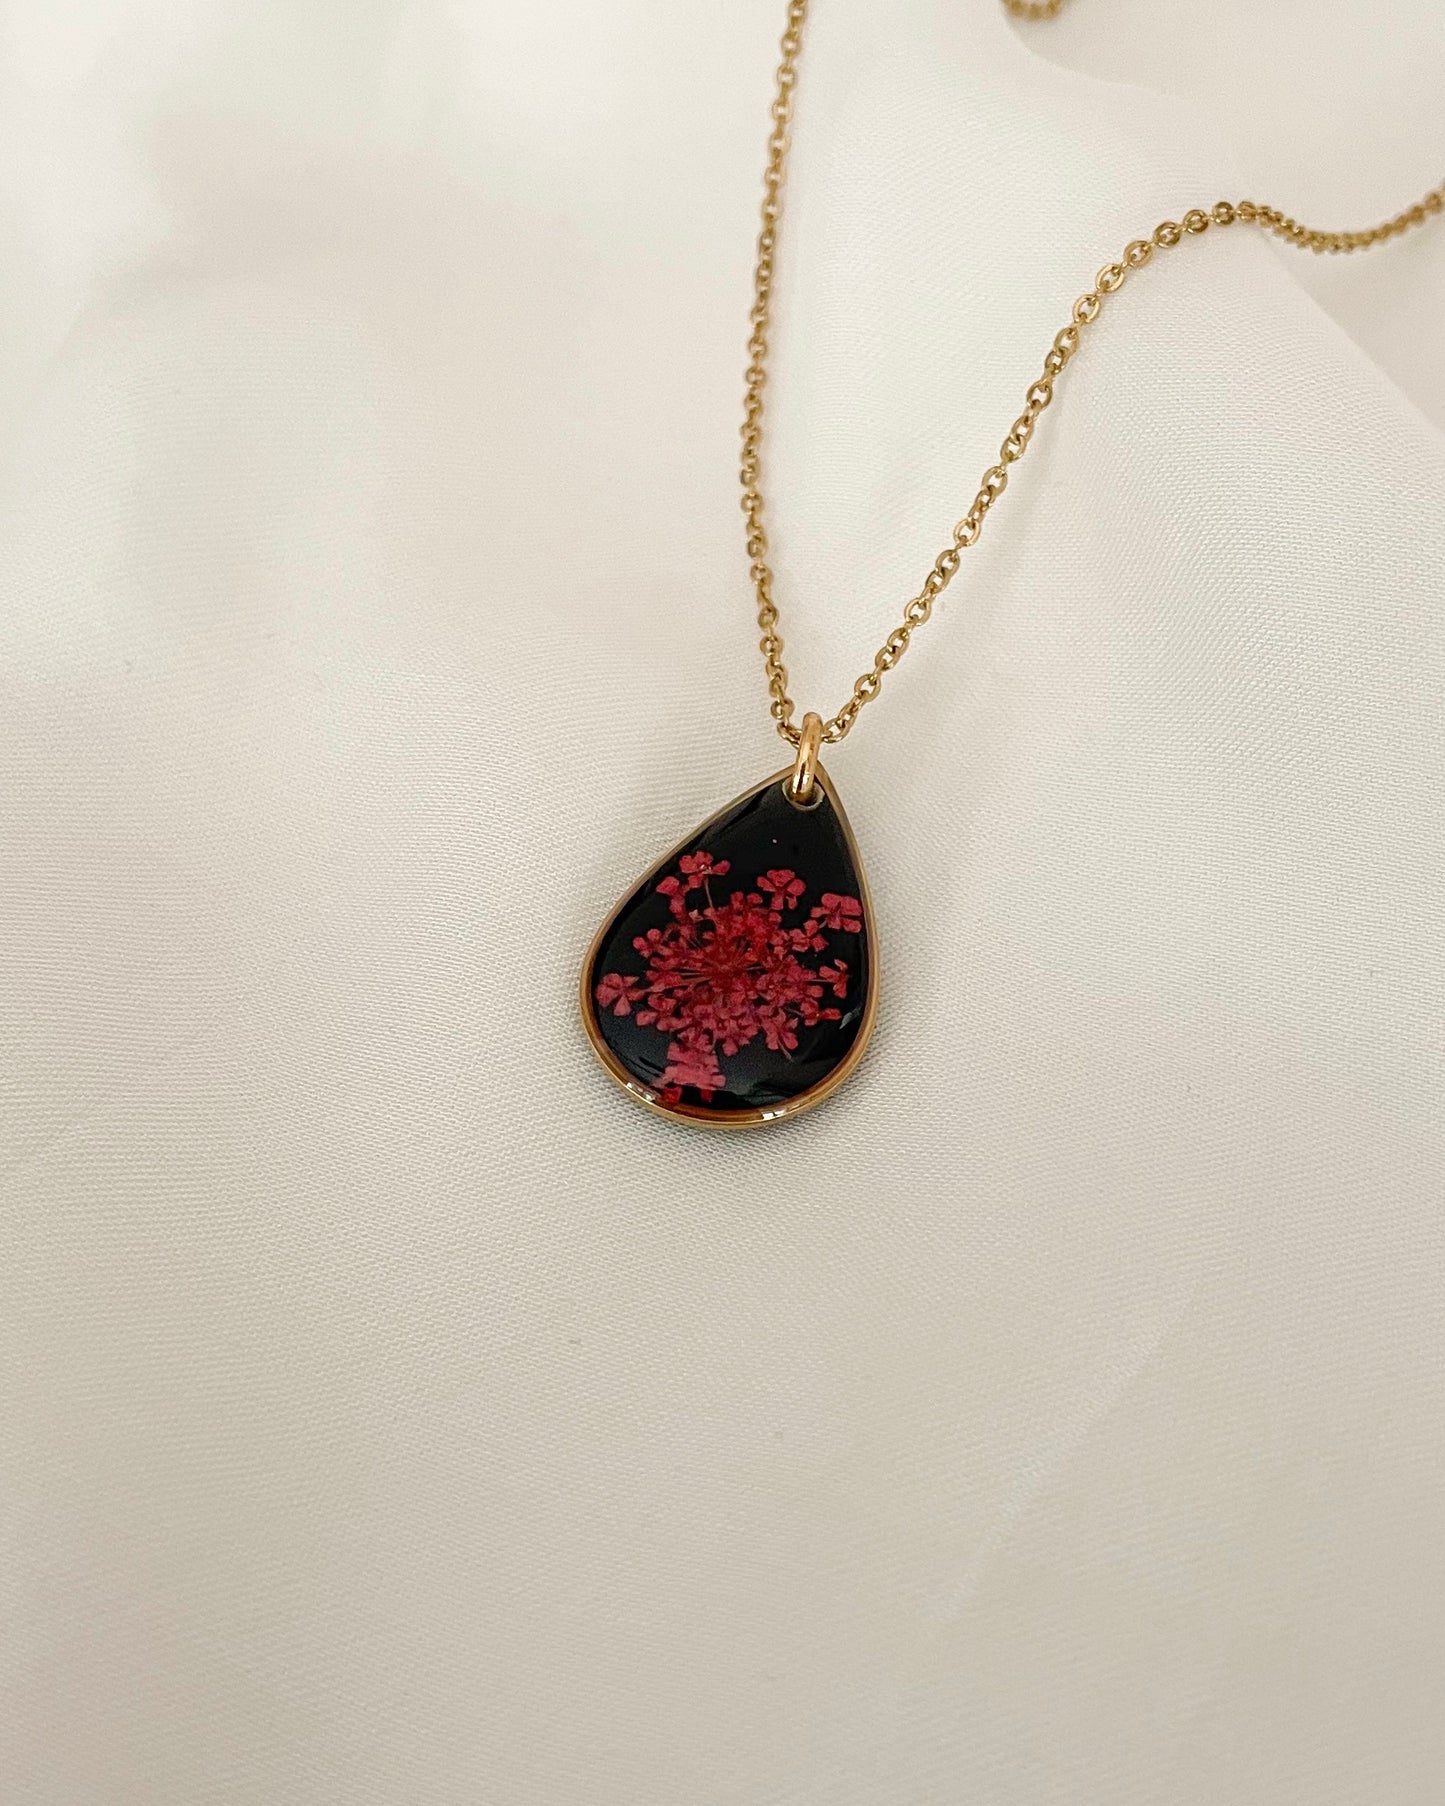 Red Queen Anne's Lace Necklace